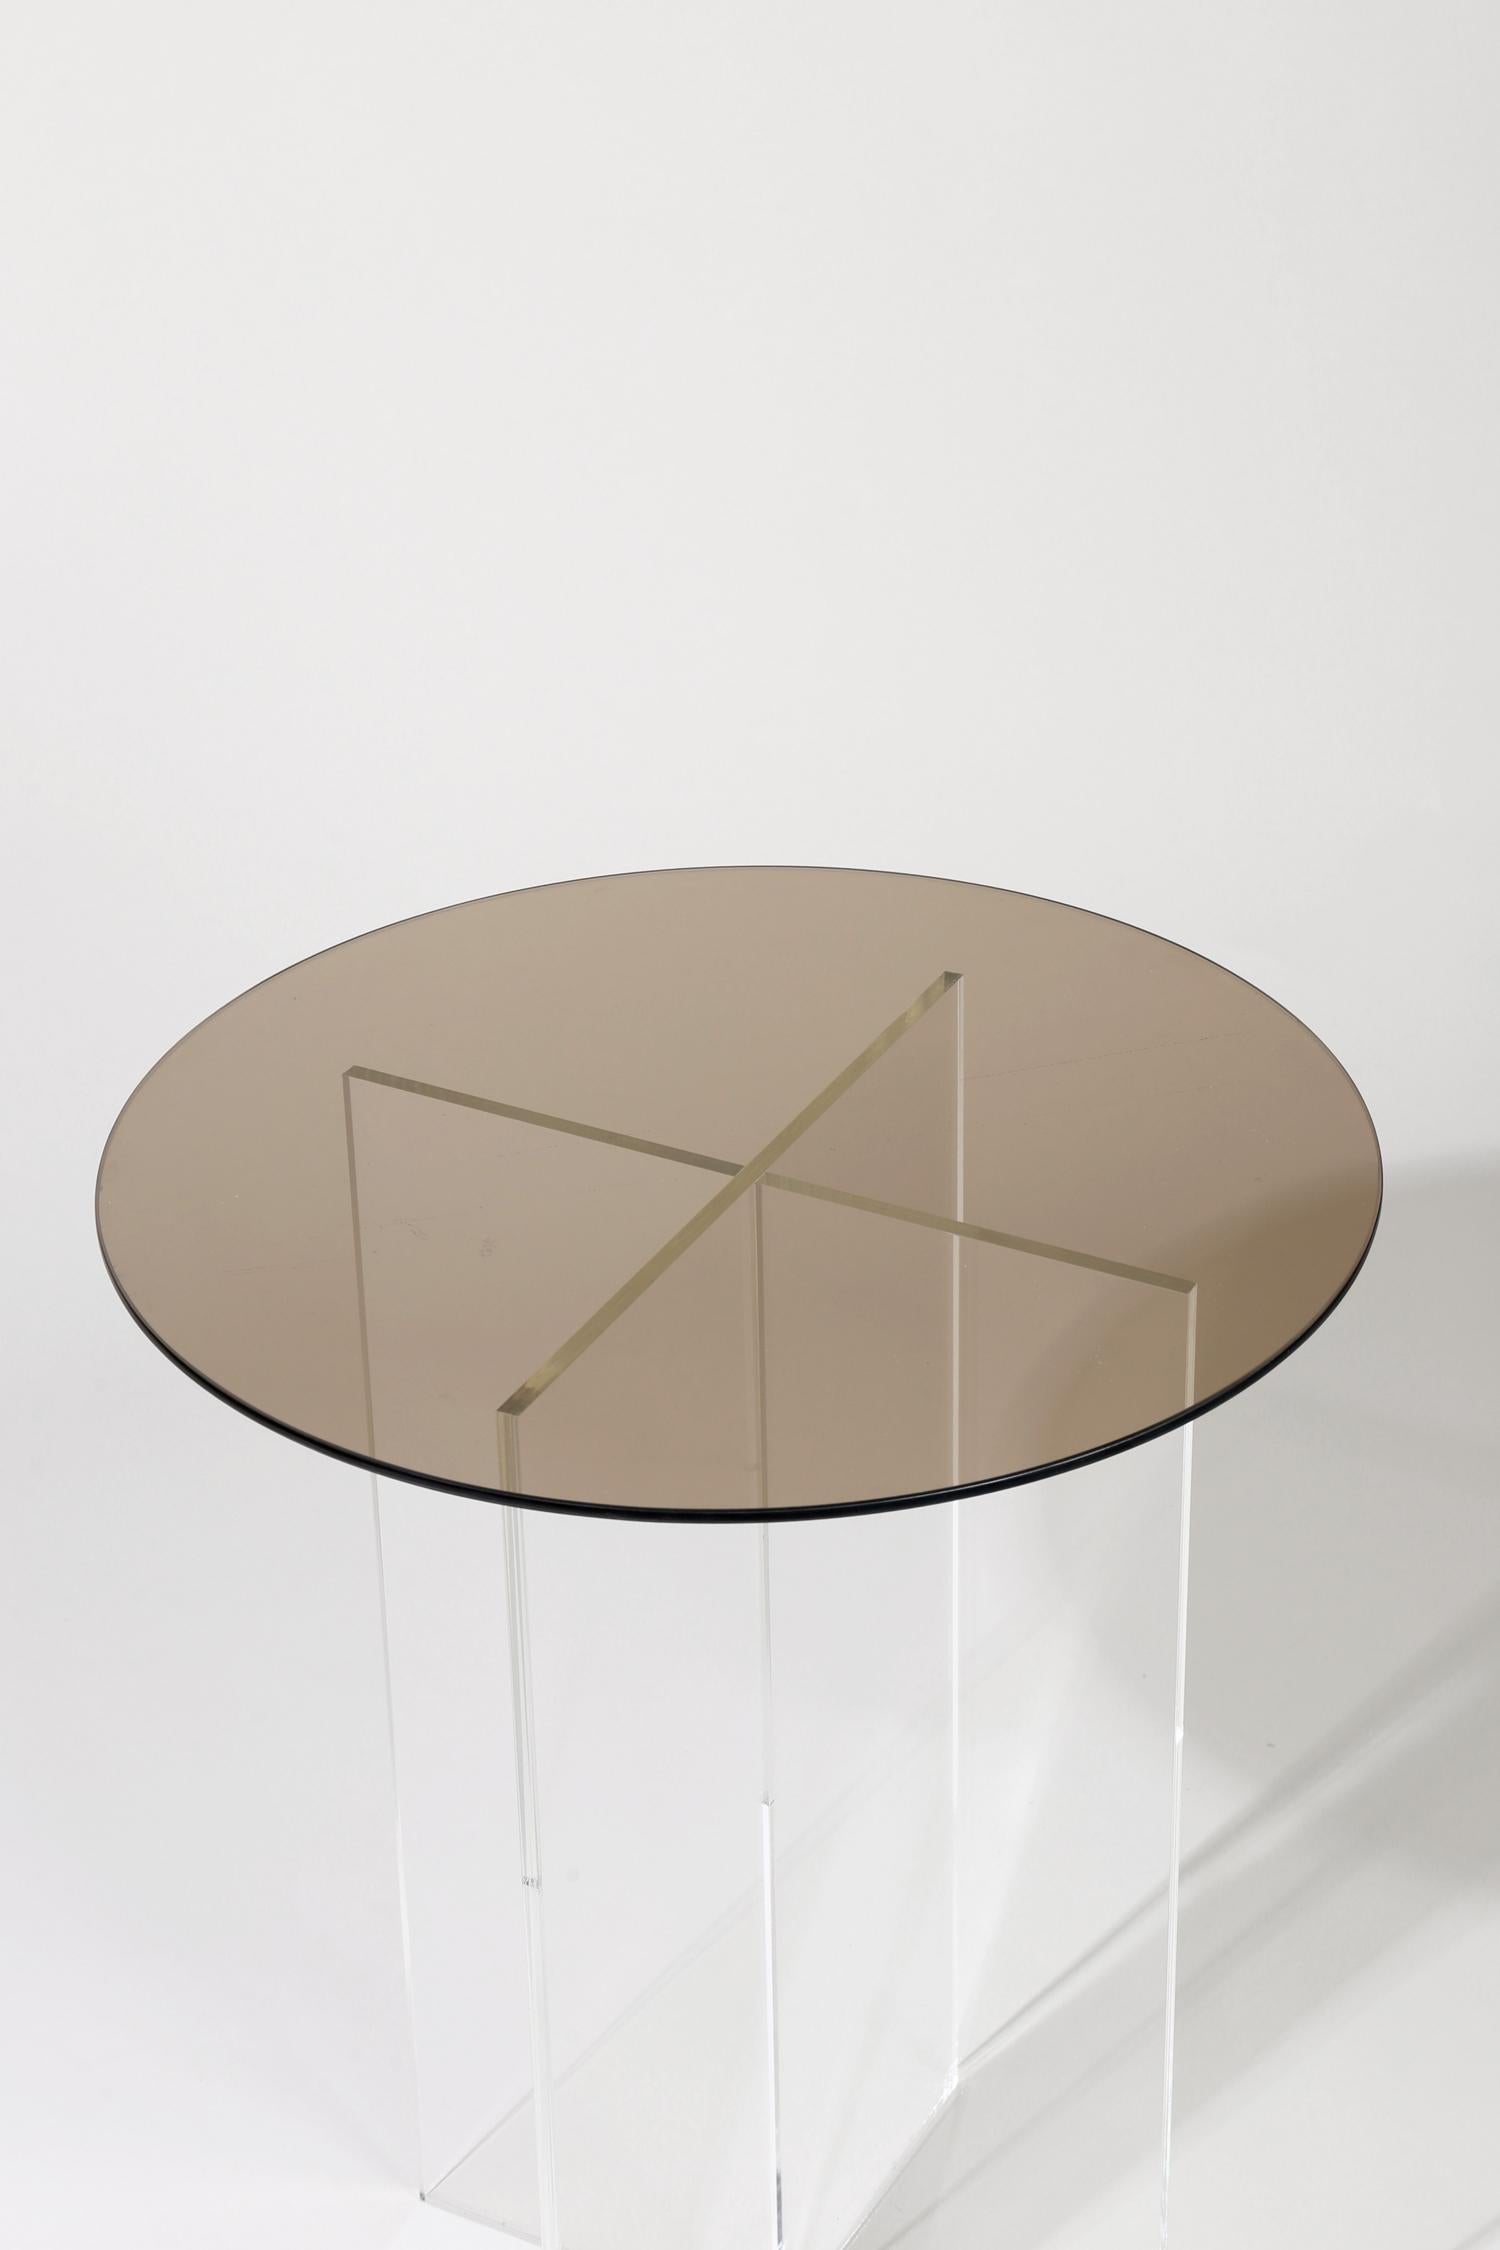 Made to order. Please allow 6 weeks for production.

The section side table is designed with clear vertical structures that give the appearance of floating horizontal spans. The effect is subtle with all clear glass or can be accentuated with